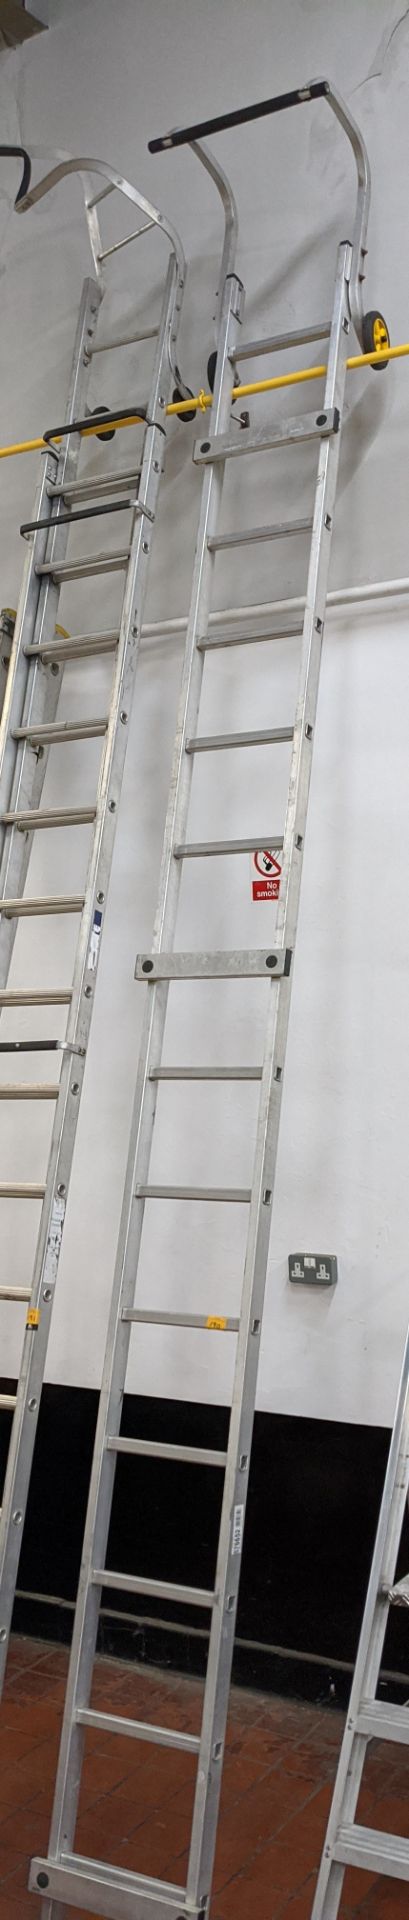 Roofing ladder circa 14ft long (excluding roofing attachment) - Image 2 of 3